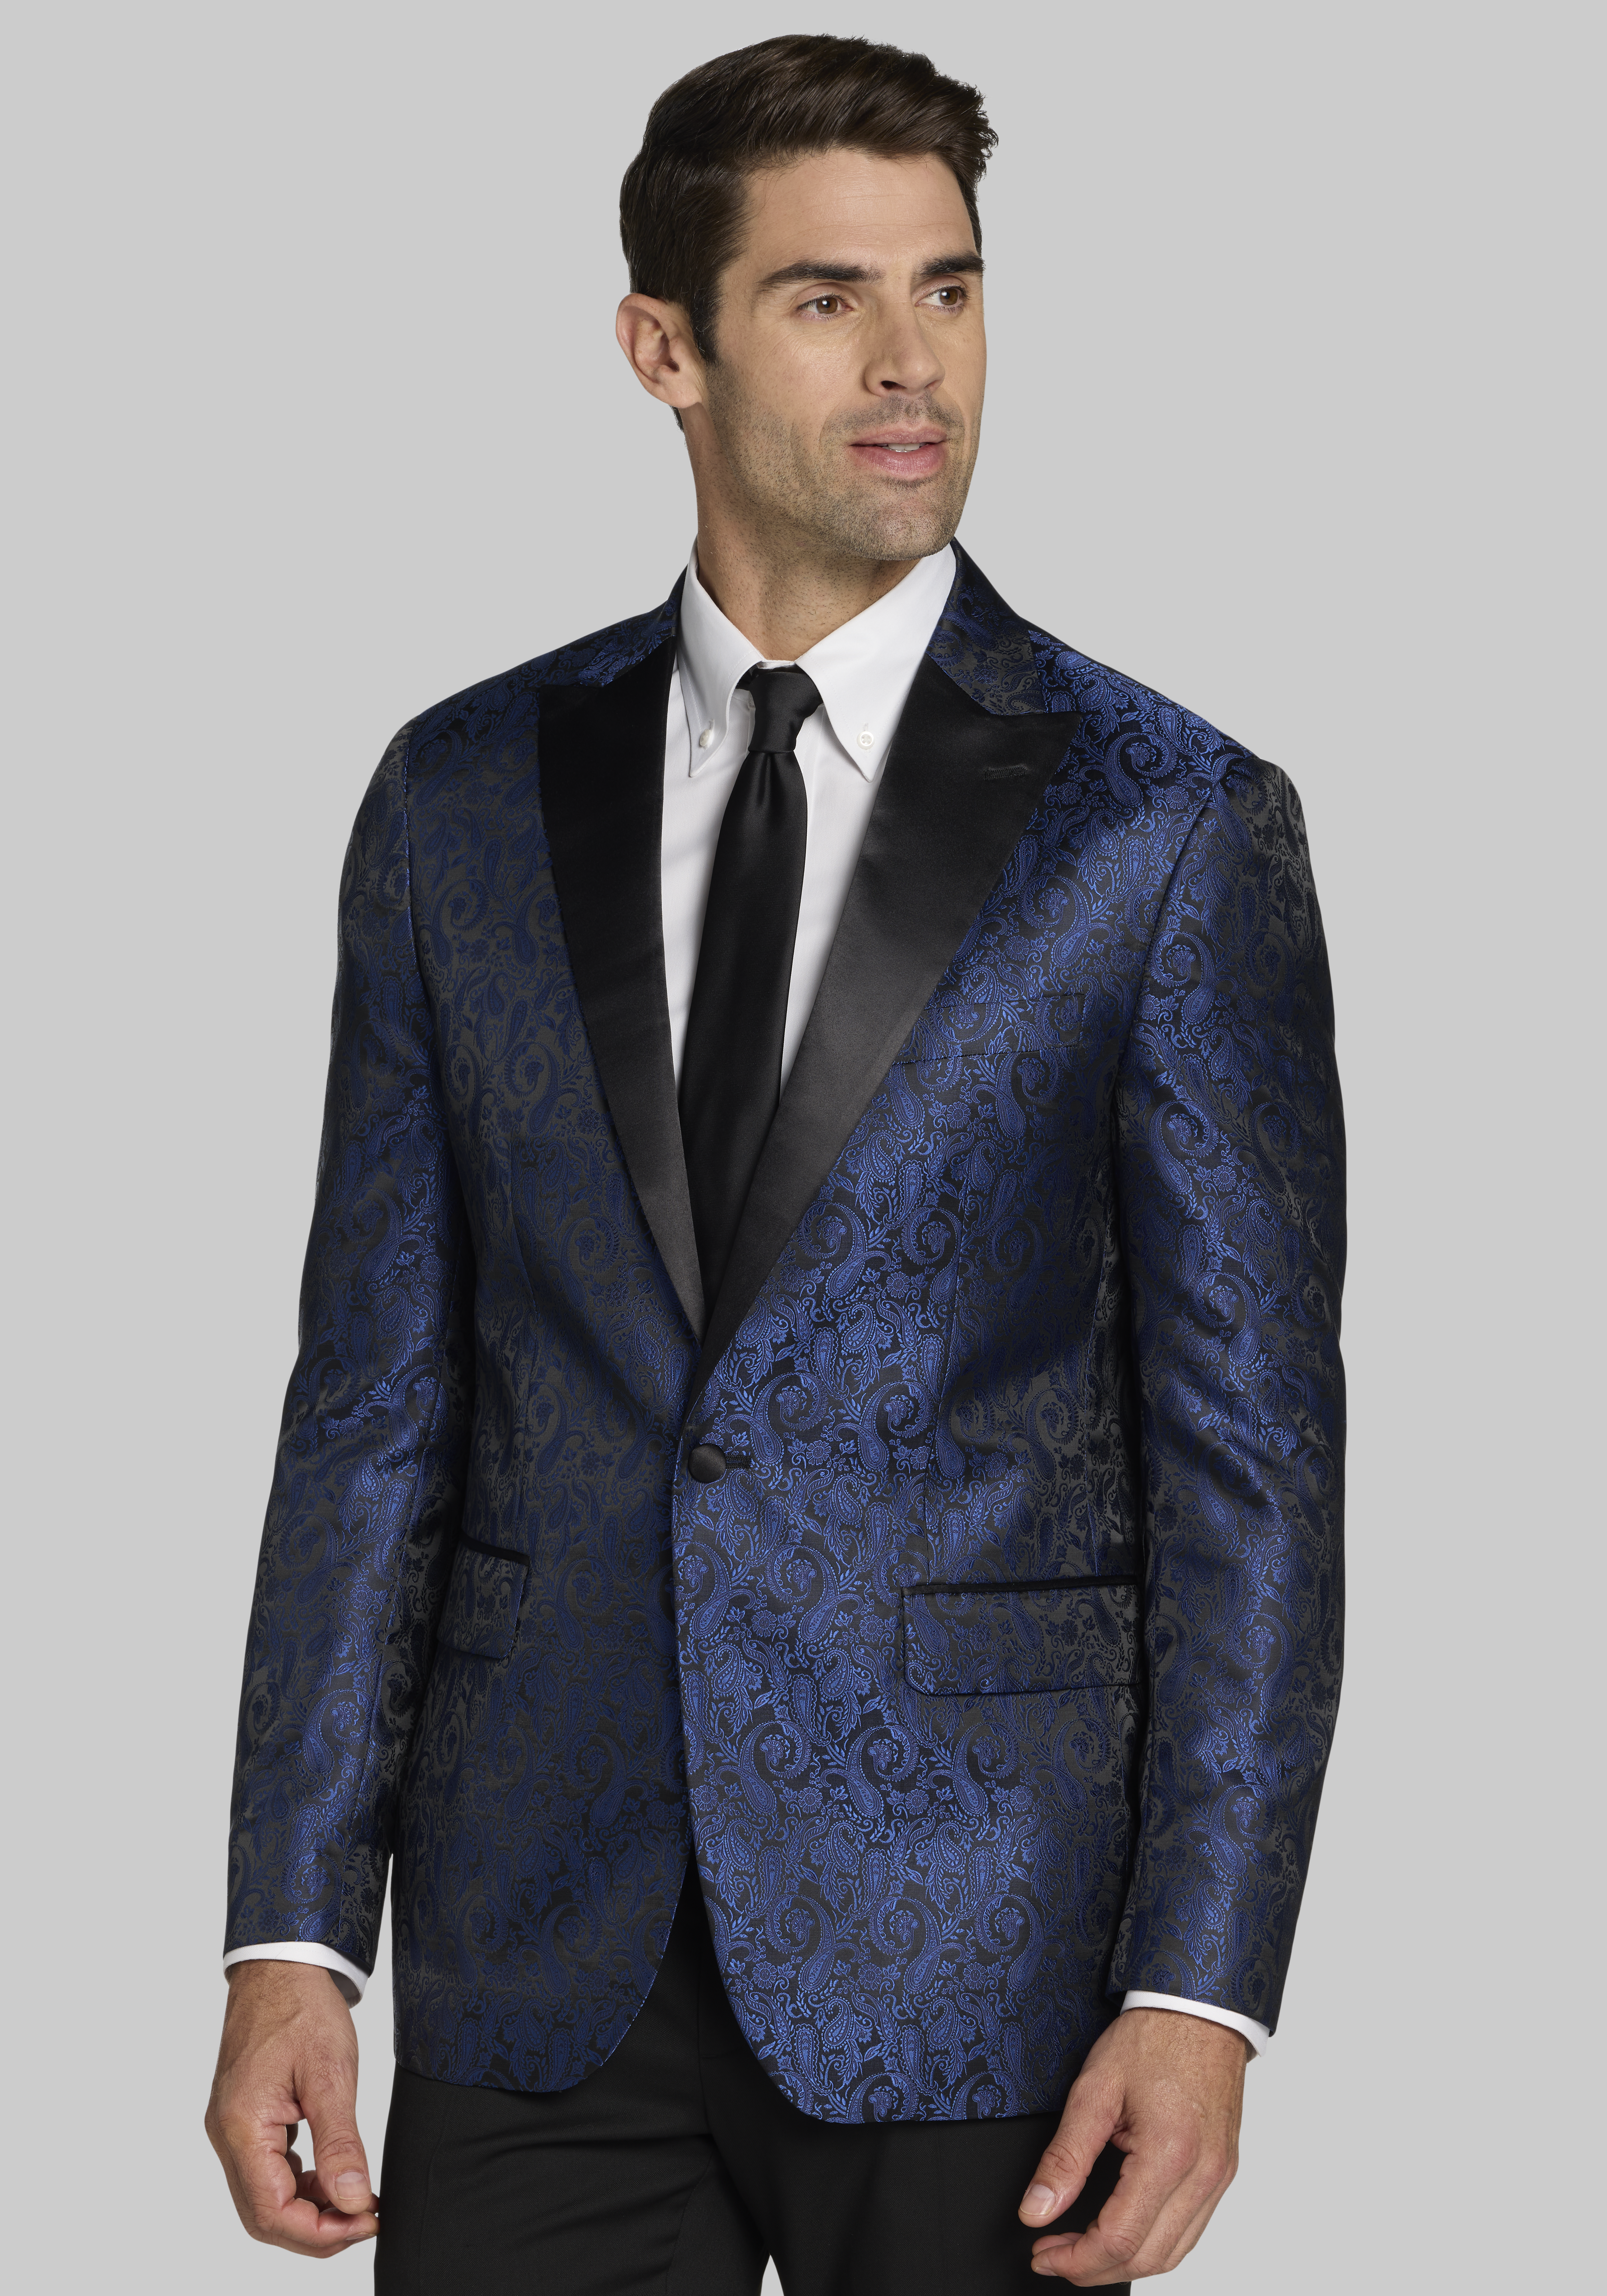 Tailored Fit Sportcoats | Men's Sportcoats | JoS. A. Bank